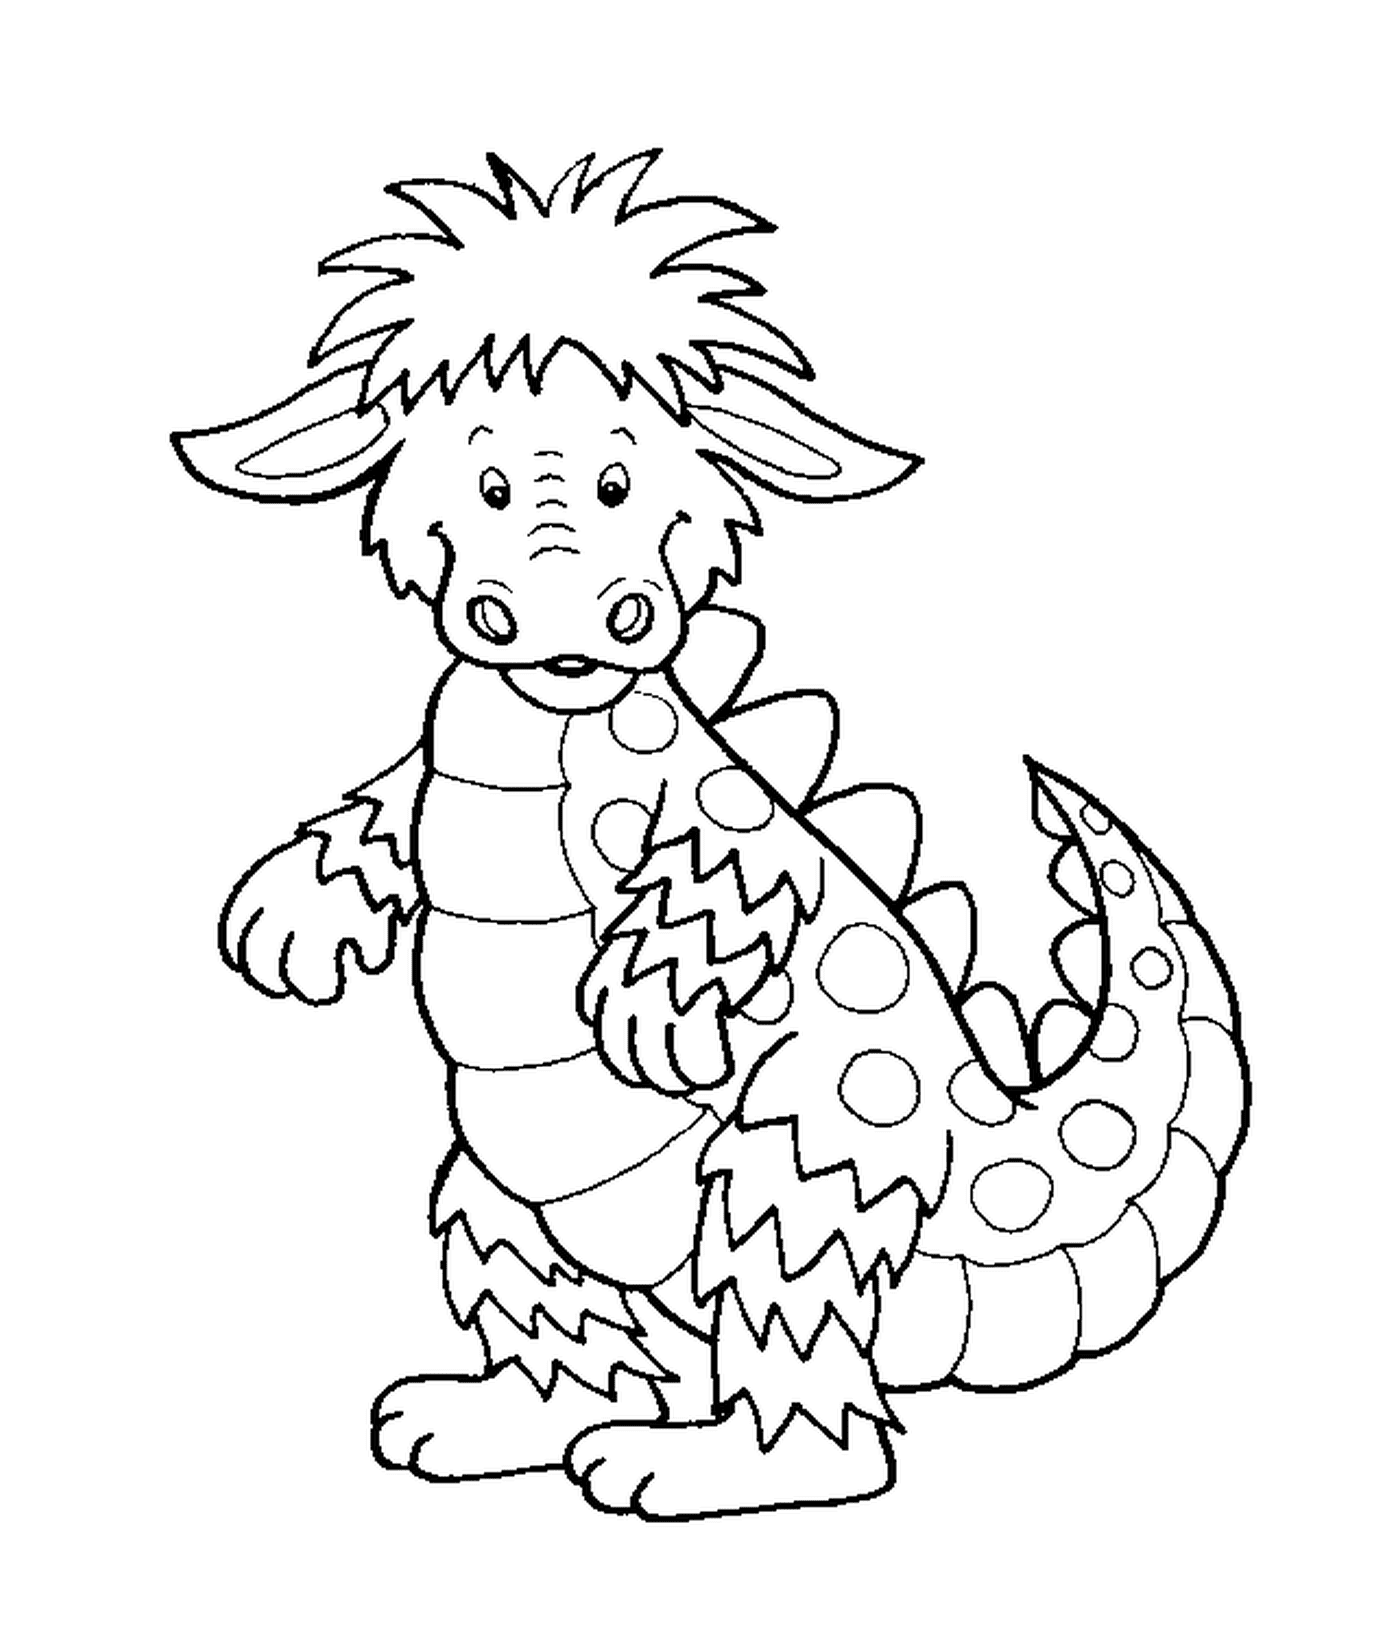  Dragon easy to draw for children 